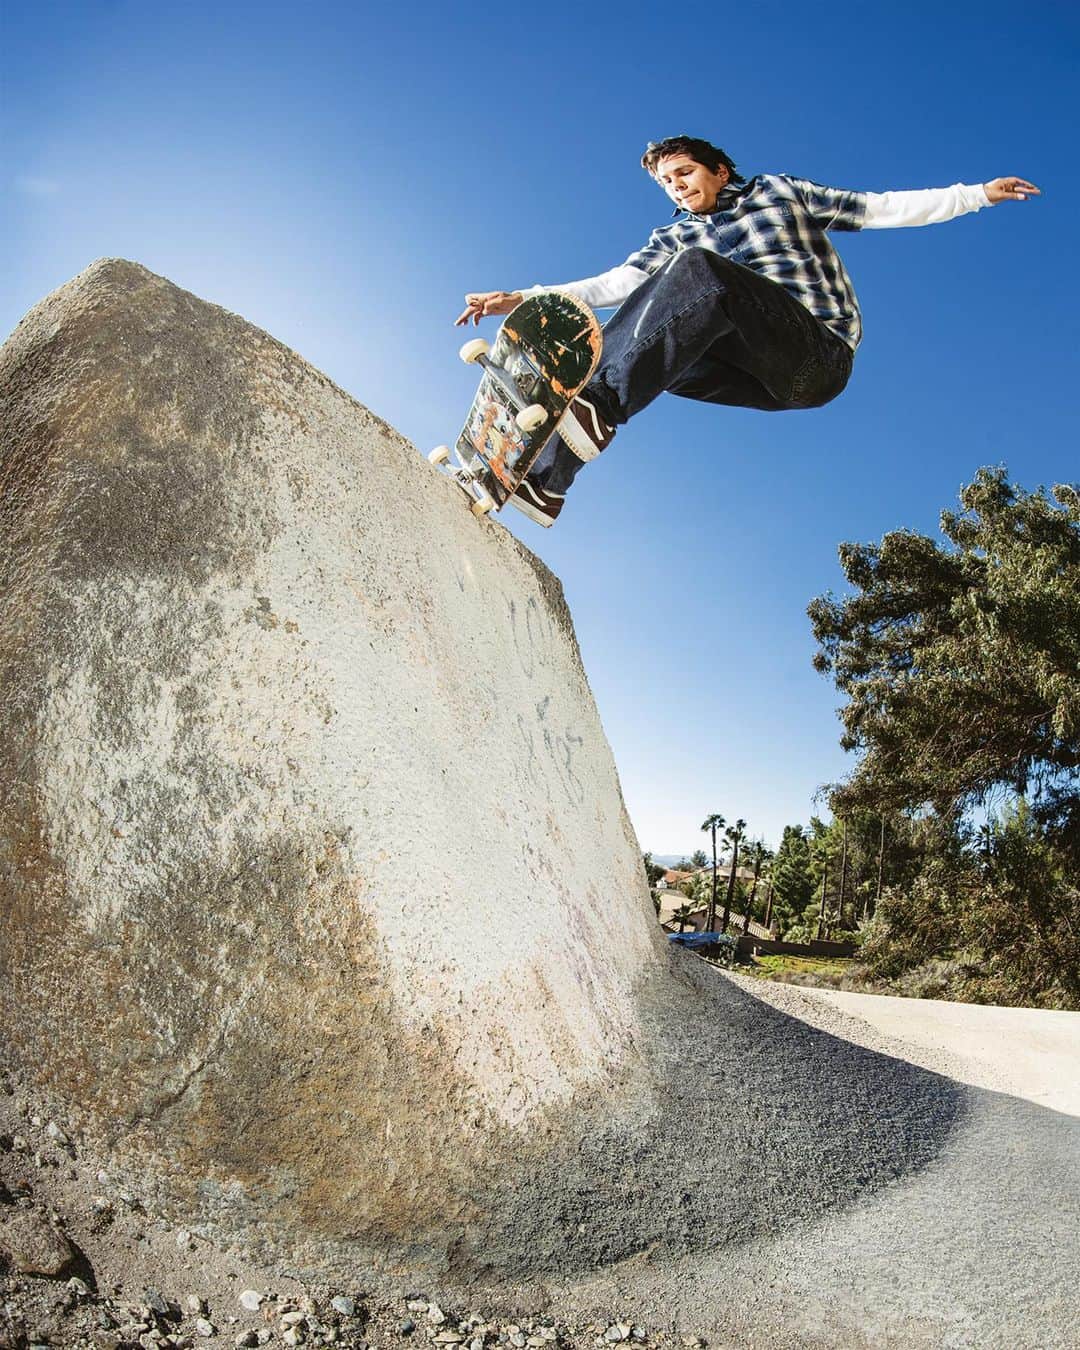 Vans Skateのインスタグラム：「Effortless style from head to toe. Don’t stall, check out the Nick Michel Skate Classics collection today at vans.com/skateboarding」